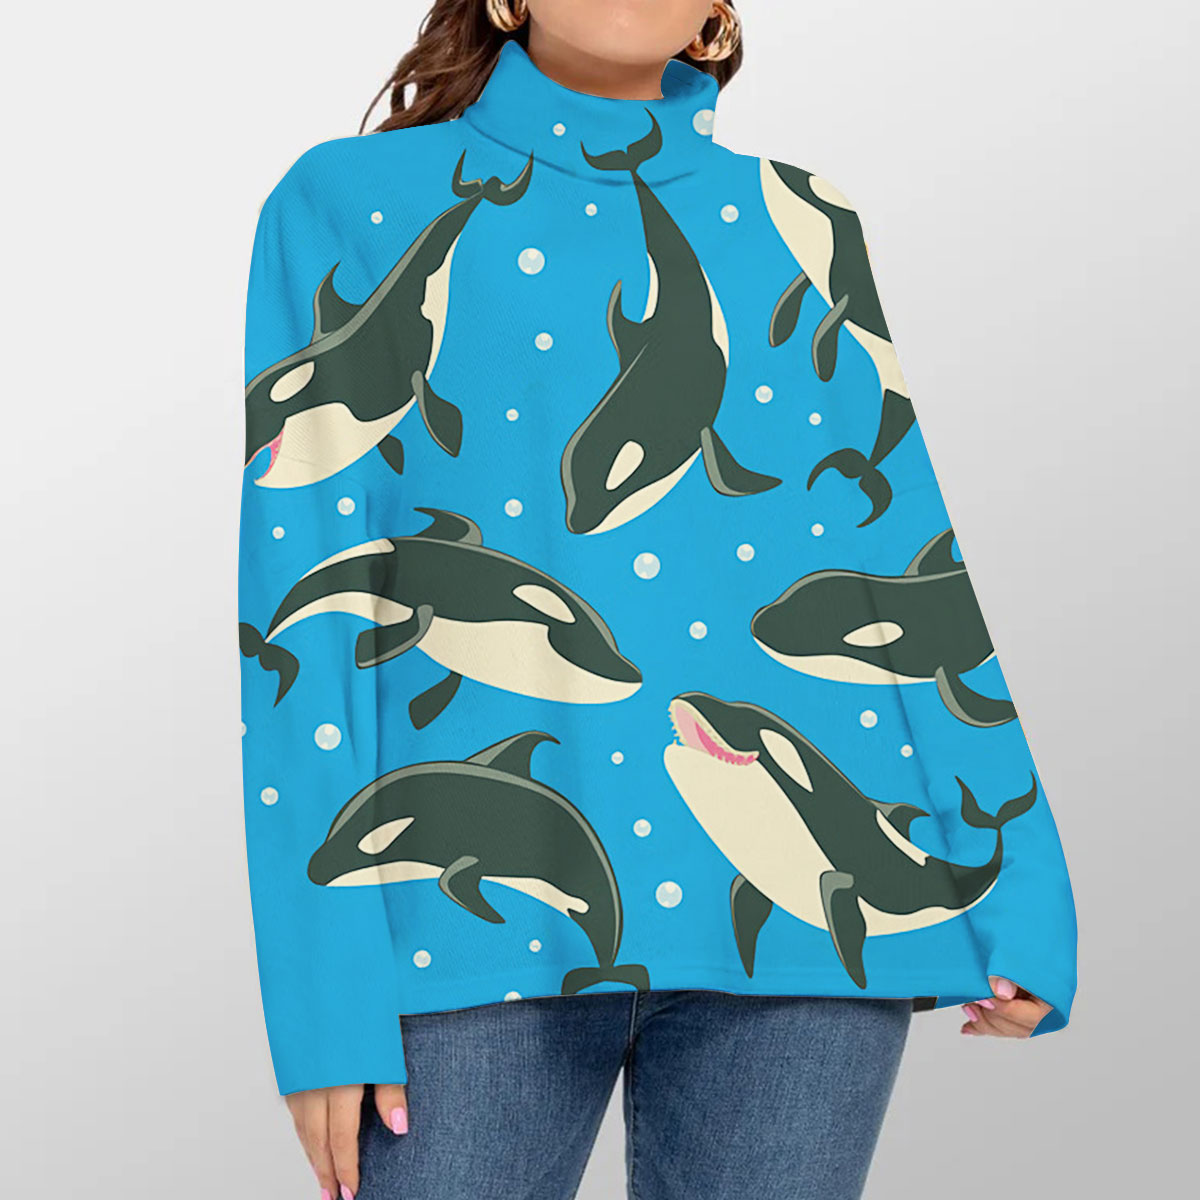 Orca Whale On Blue Turtleneck Sweater